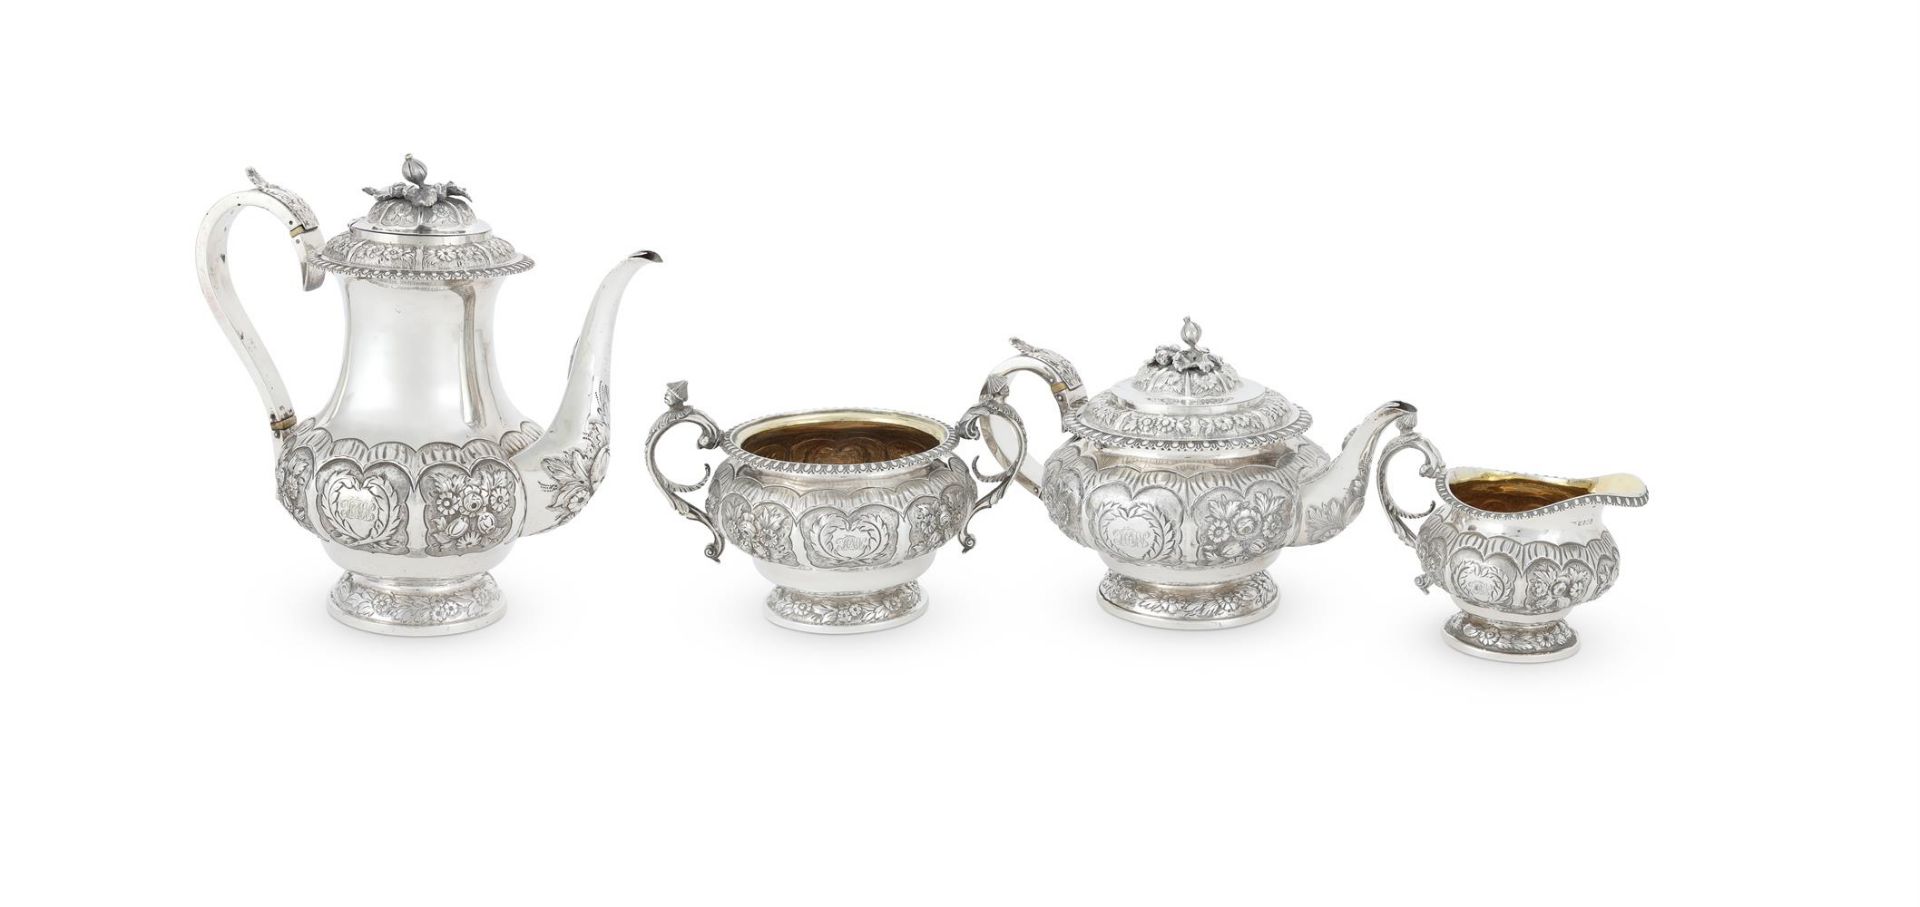 Y A SILVER MATCHED FOUR PIECE BALUSTER TEA AND COFFEE SET